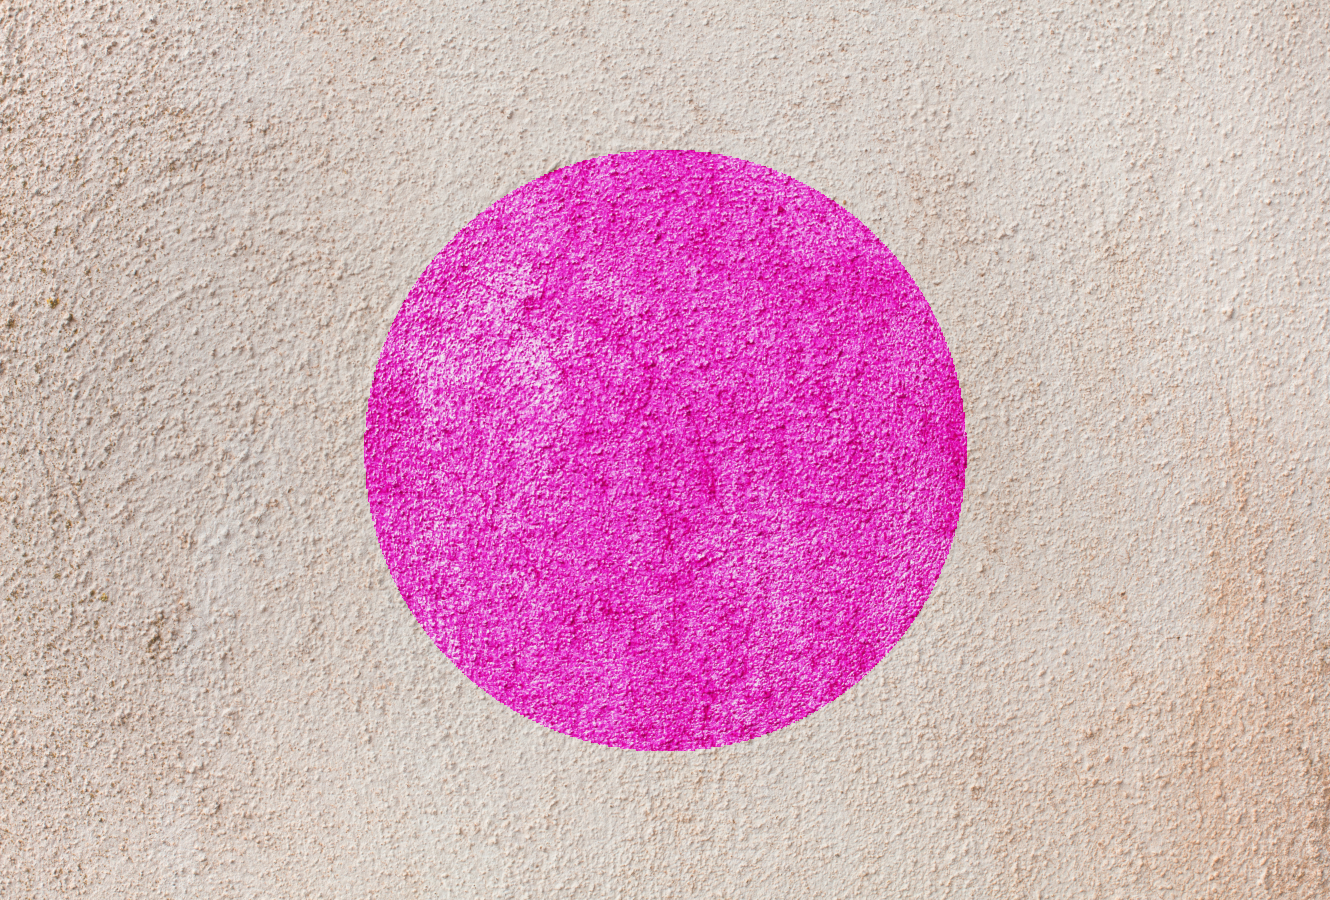 Textured cement wall with pink circle